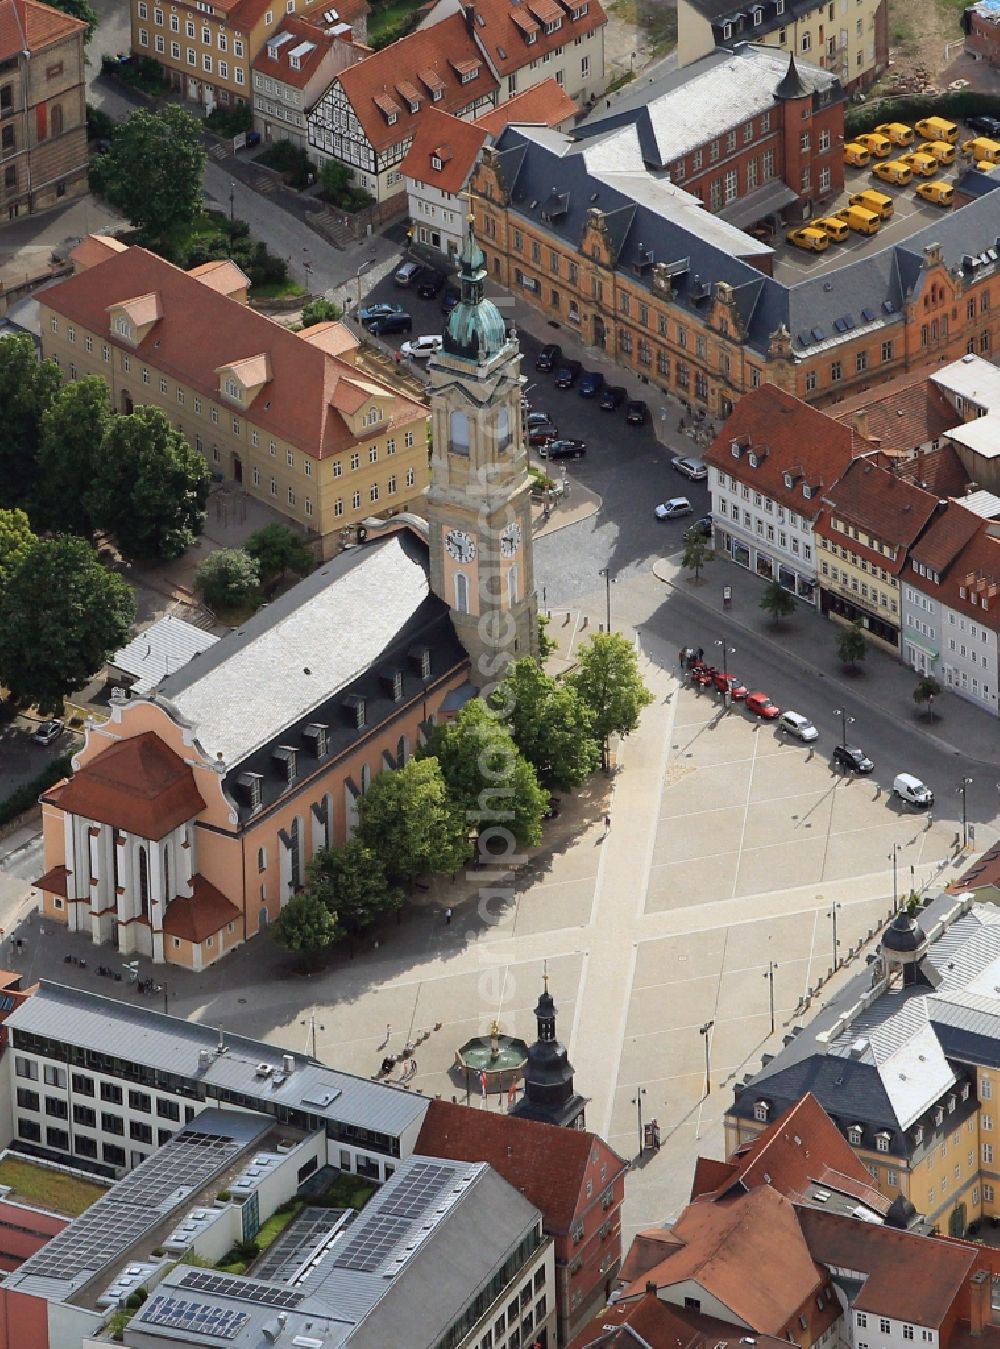 Aerial image Eisenach - On the market of Eisenach in Thuringia is the George Church as an important landmark of the city. The main church of the city goes back to a Gothic hall church, which received its present appearance in the Baroque style in the 17th and 18th centuries. In this church preached the reformer Martin Luther and here the church musician Johann Sebastian Bach was baptized